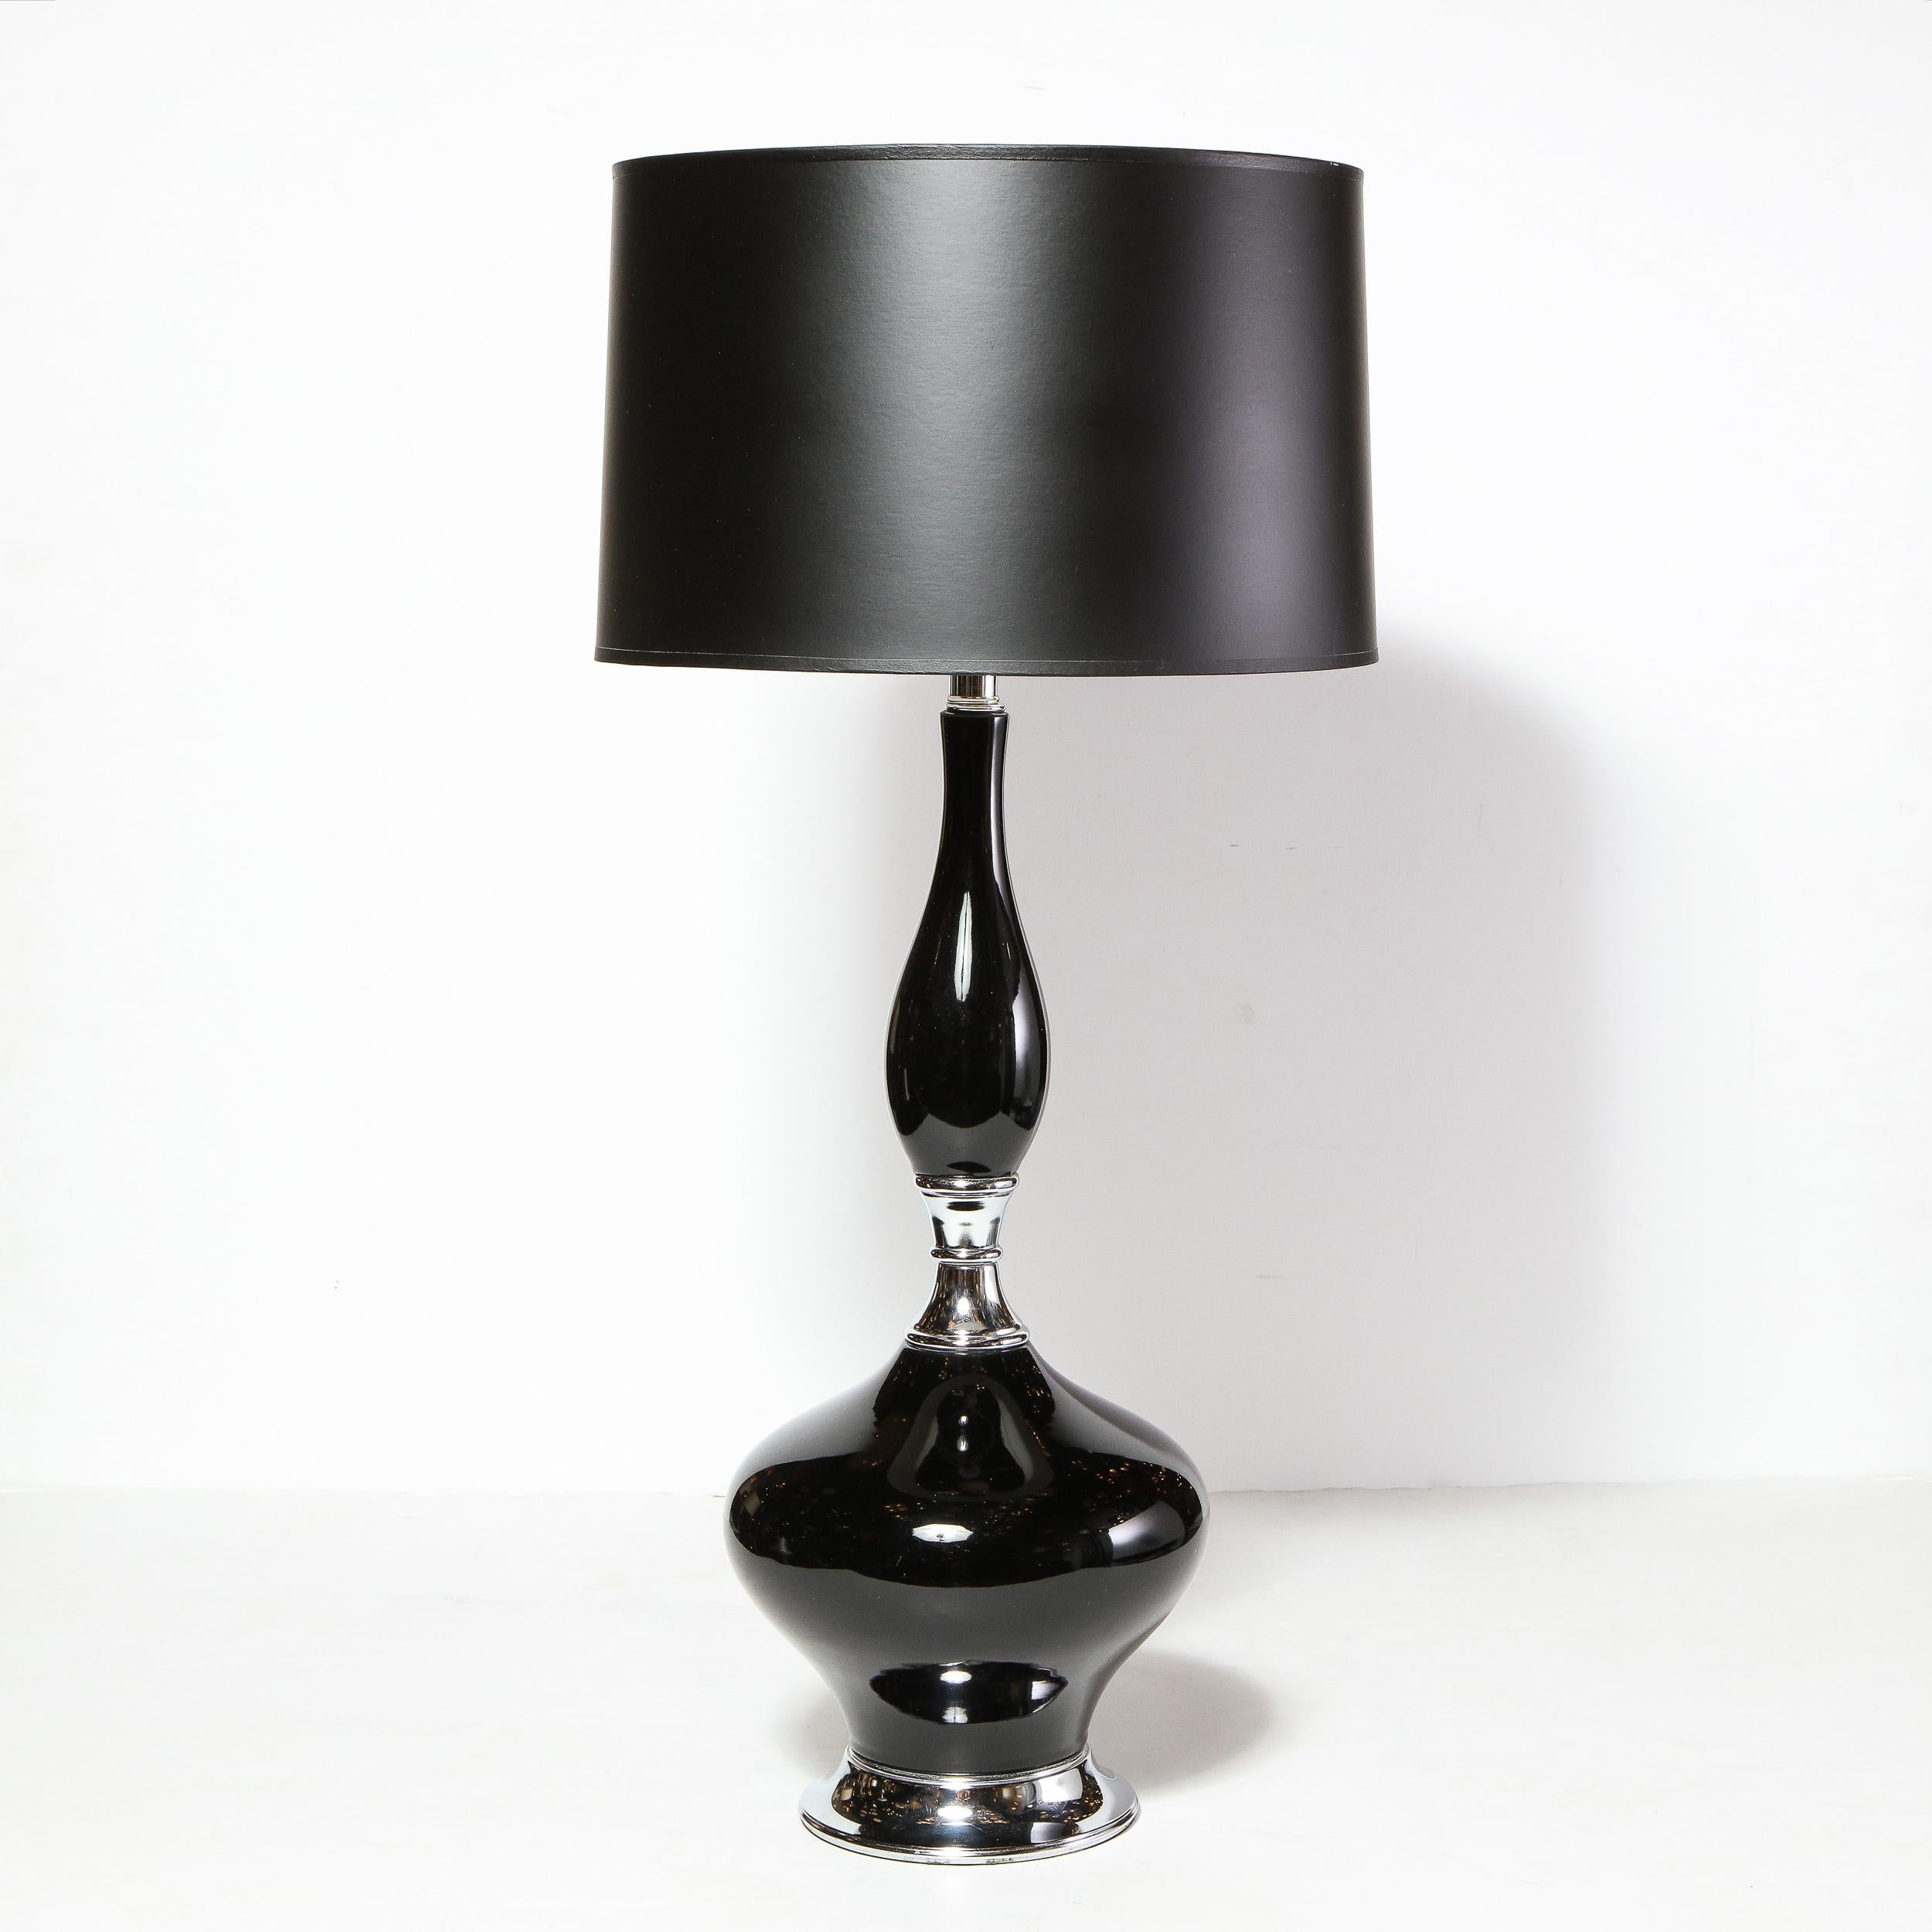 Pair of Mid-Century Modern Sculptural Black Glazed Ceramic Lamps w/ Chrome Bases In Good Condition For Sale In New York, NY